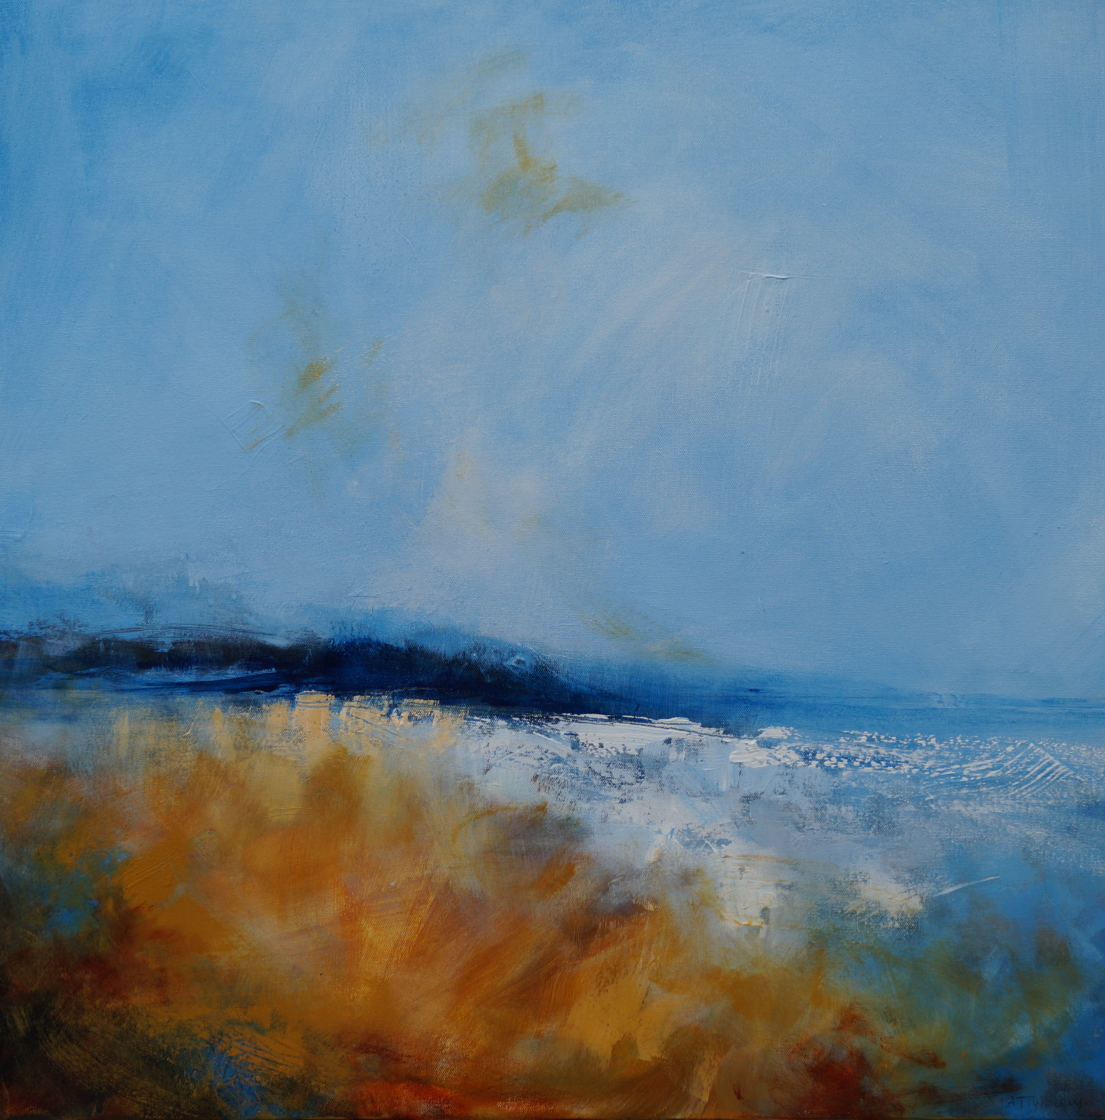 seascape- sea-blue-purple-Summer-yellow-red-South-downs-moors-Alison-Tyldesley-original-framed-atmosheric-landscapes-impressionism